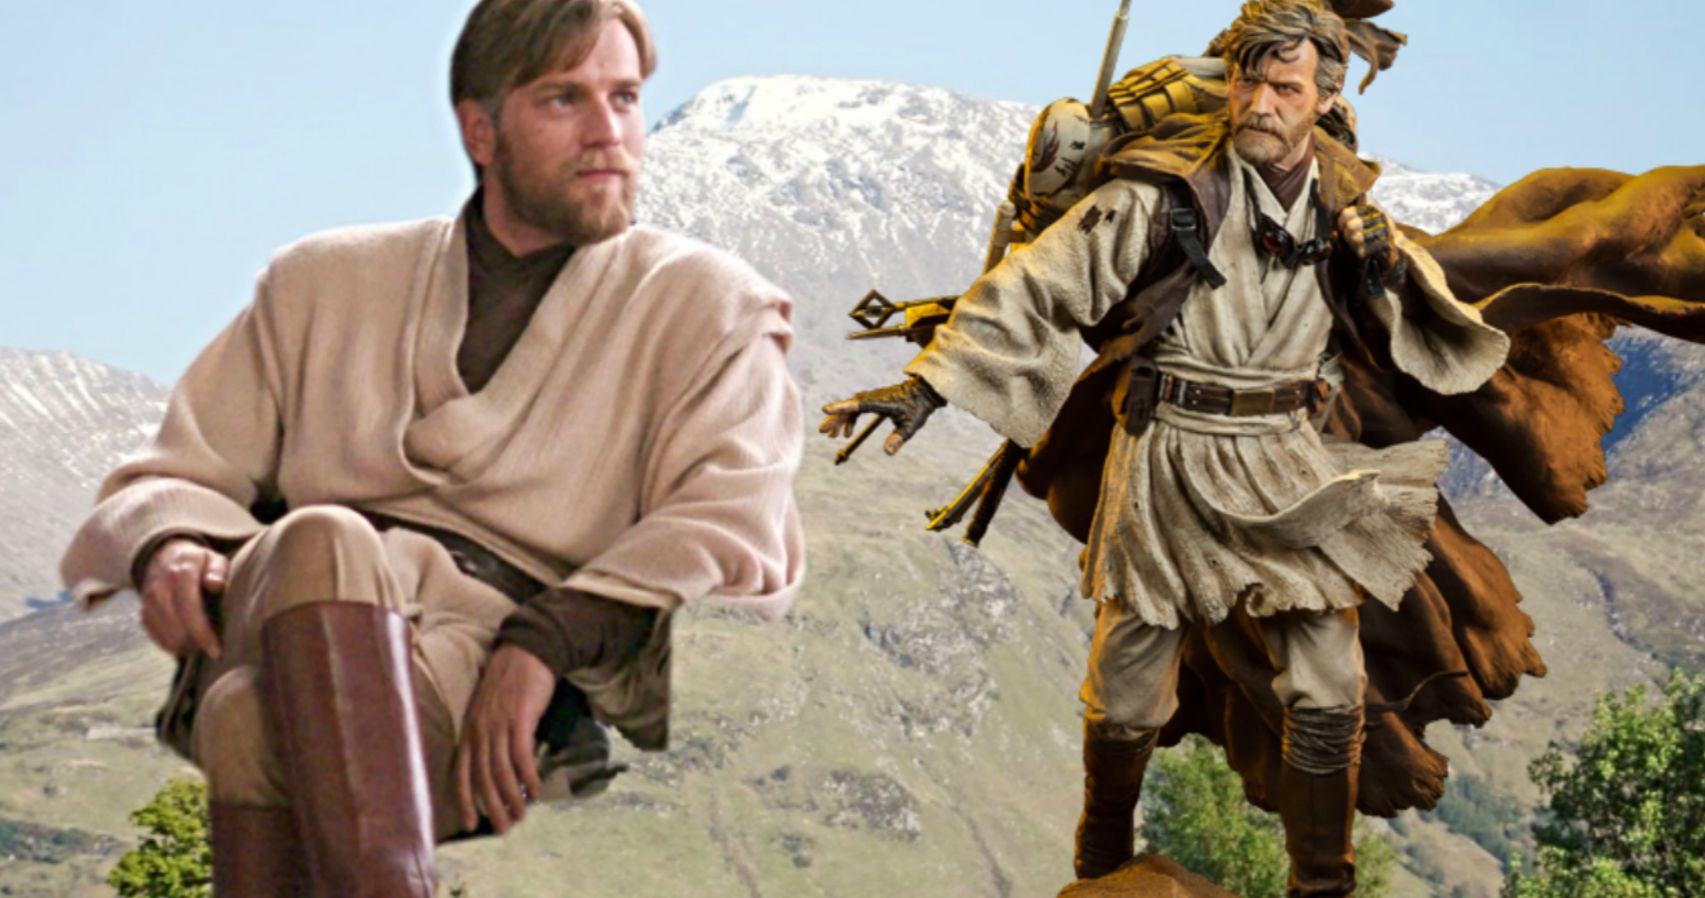 Star Wars Fans Petition for Obi-Wan Statue to Get the High Ground in Scotland